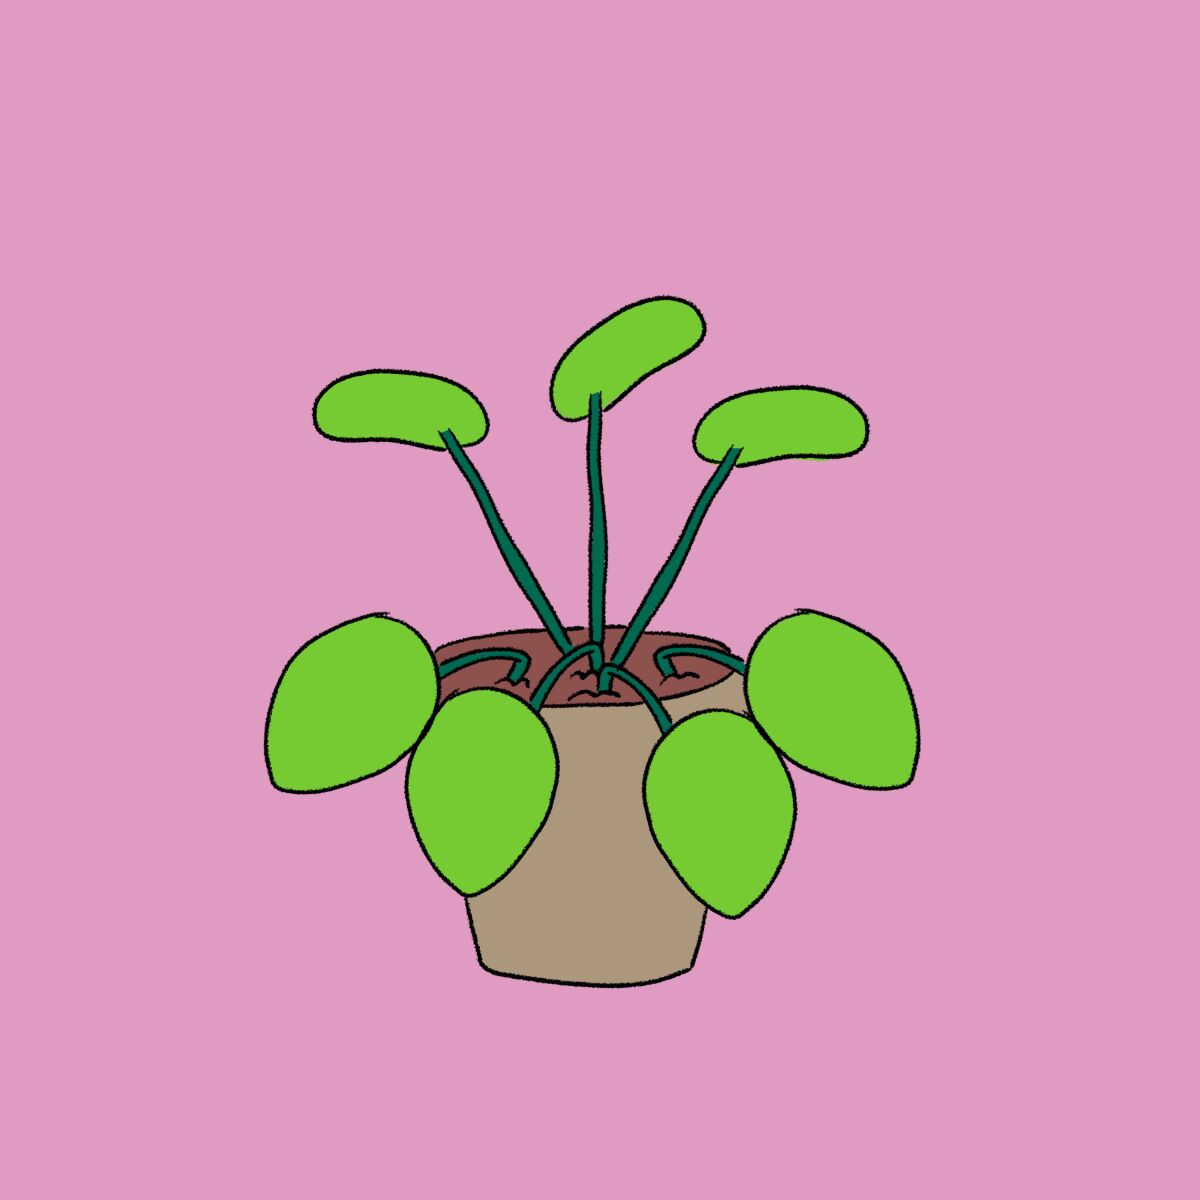 An illustration of a pilea peperomioides